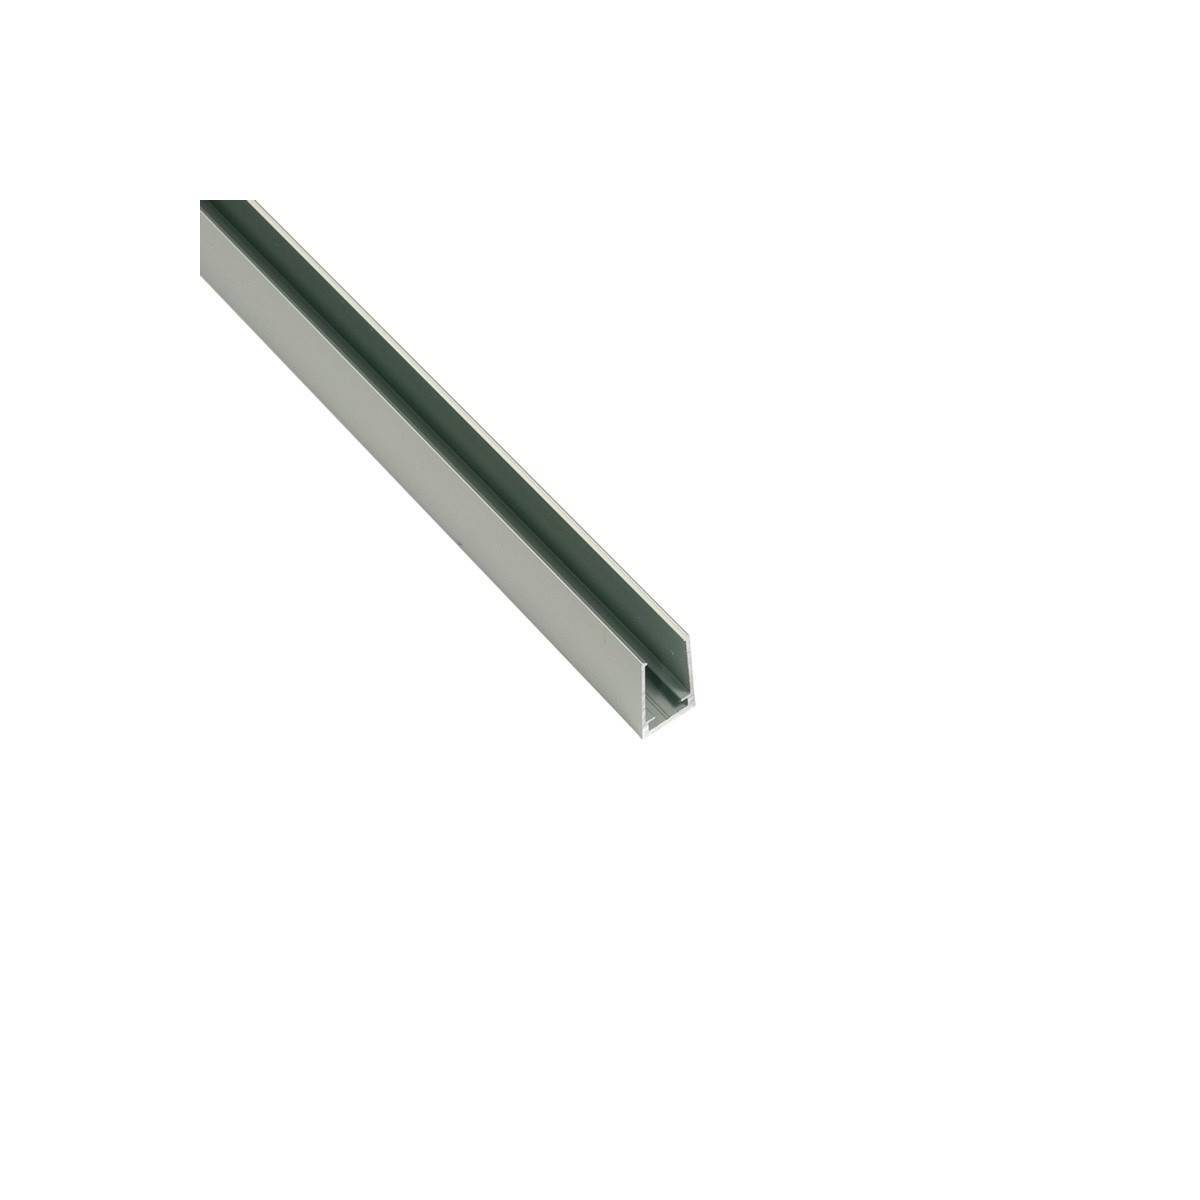 Aluminum profile 25x14 mm for silicone sleeve - 2 meters